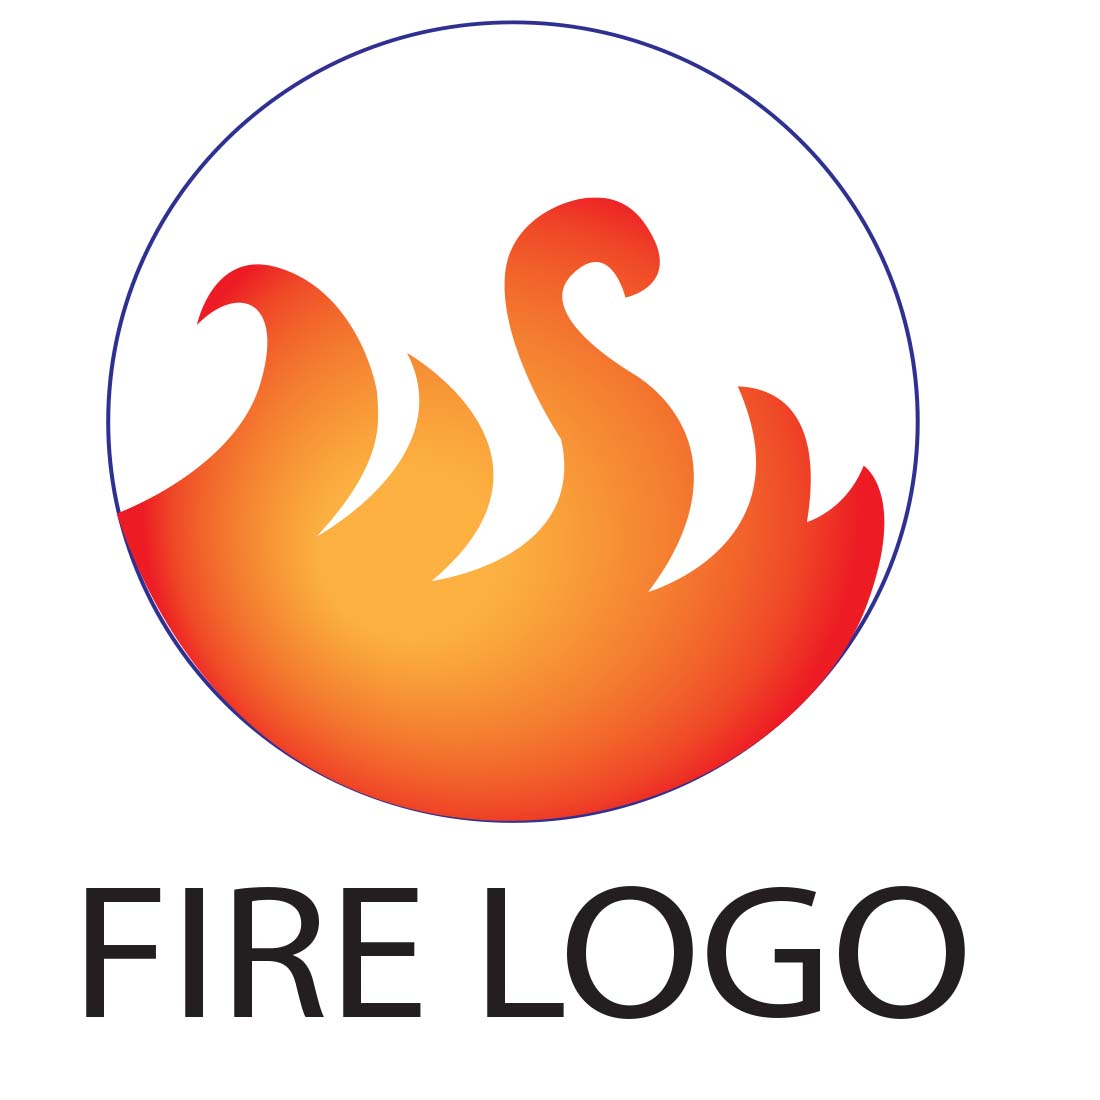 FIRE LOGO cover image.